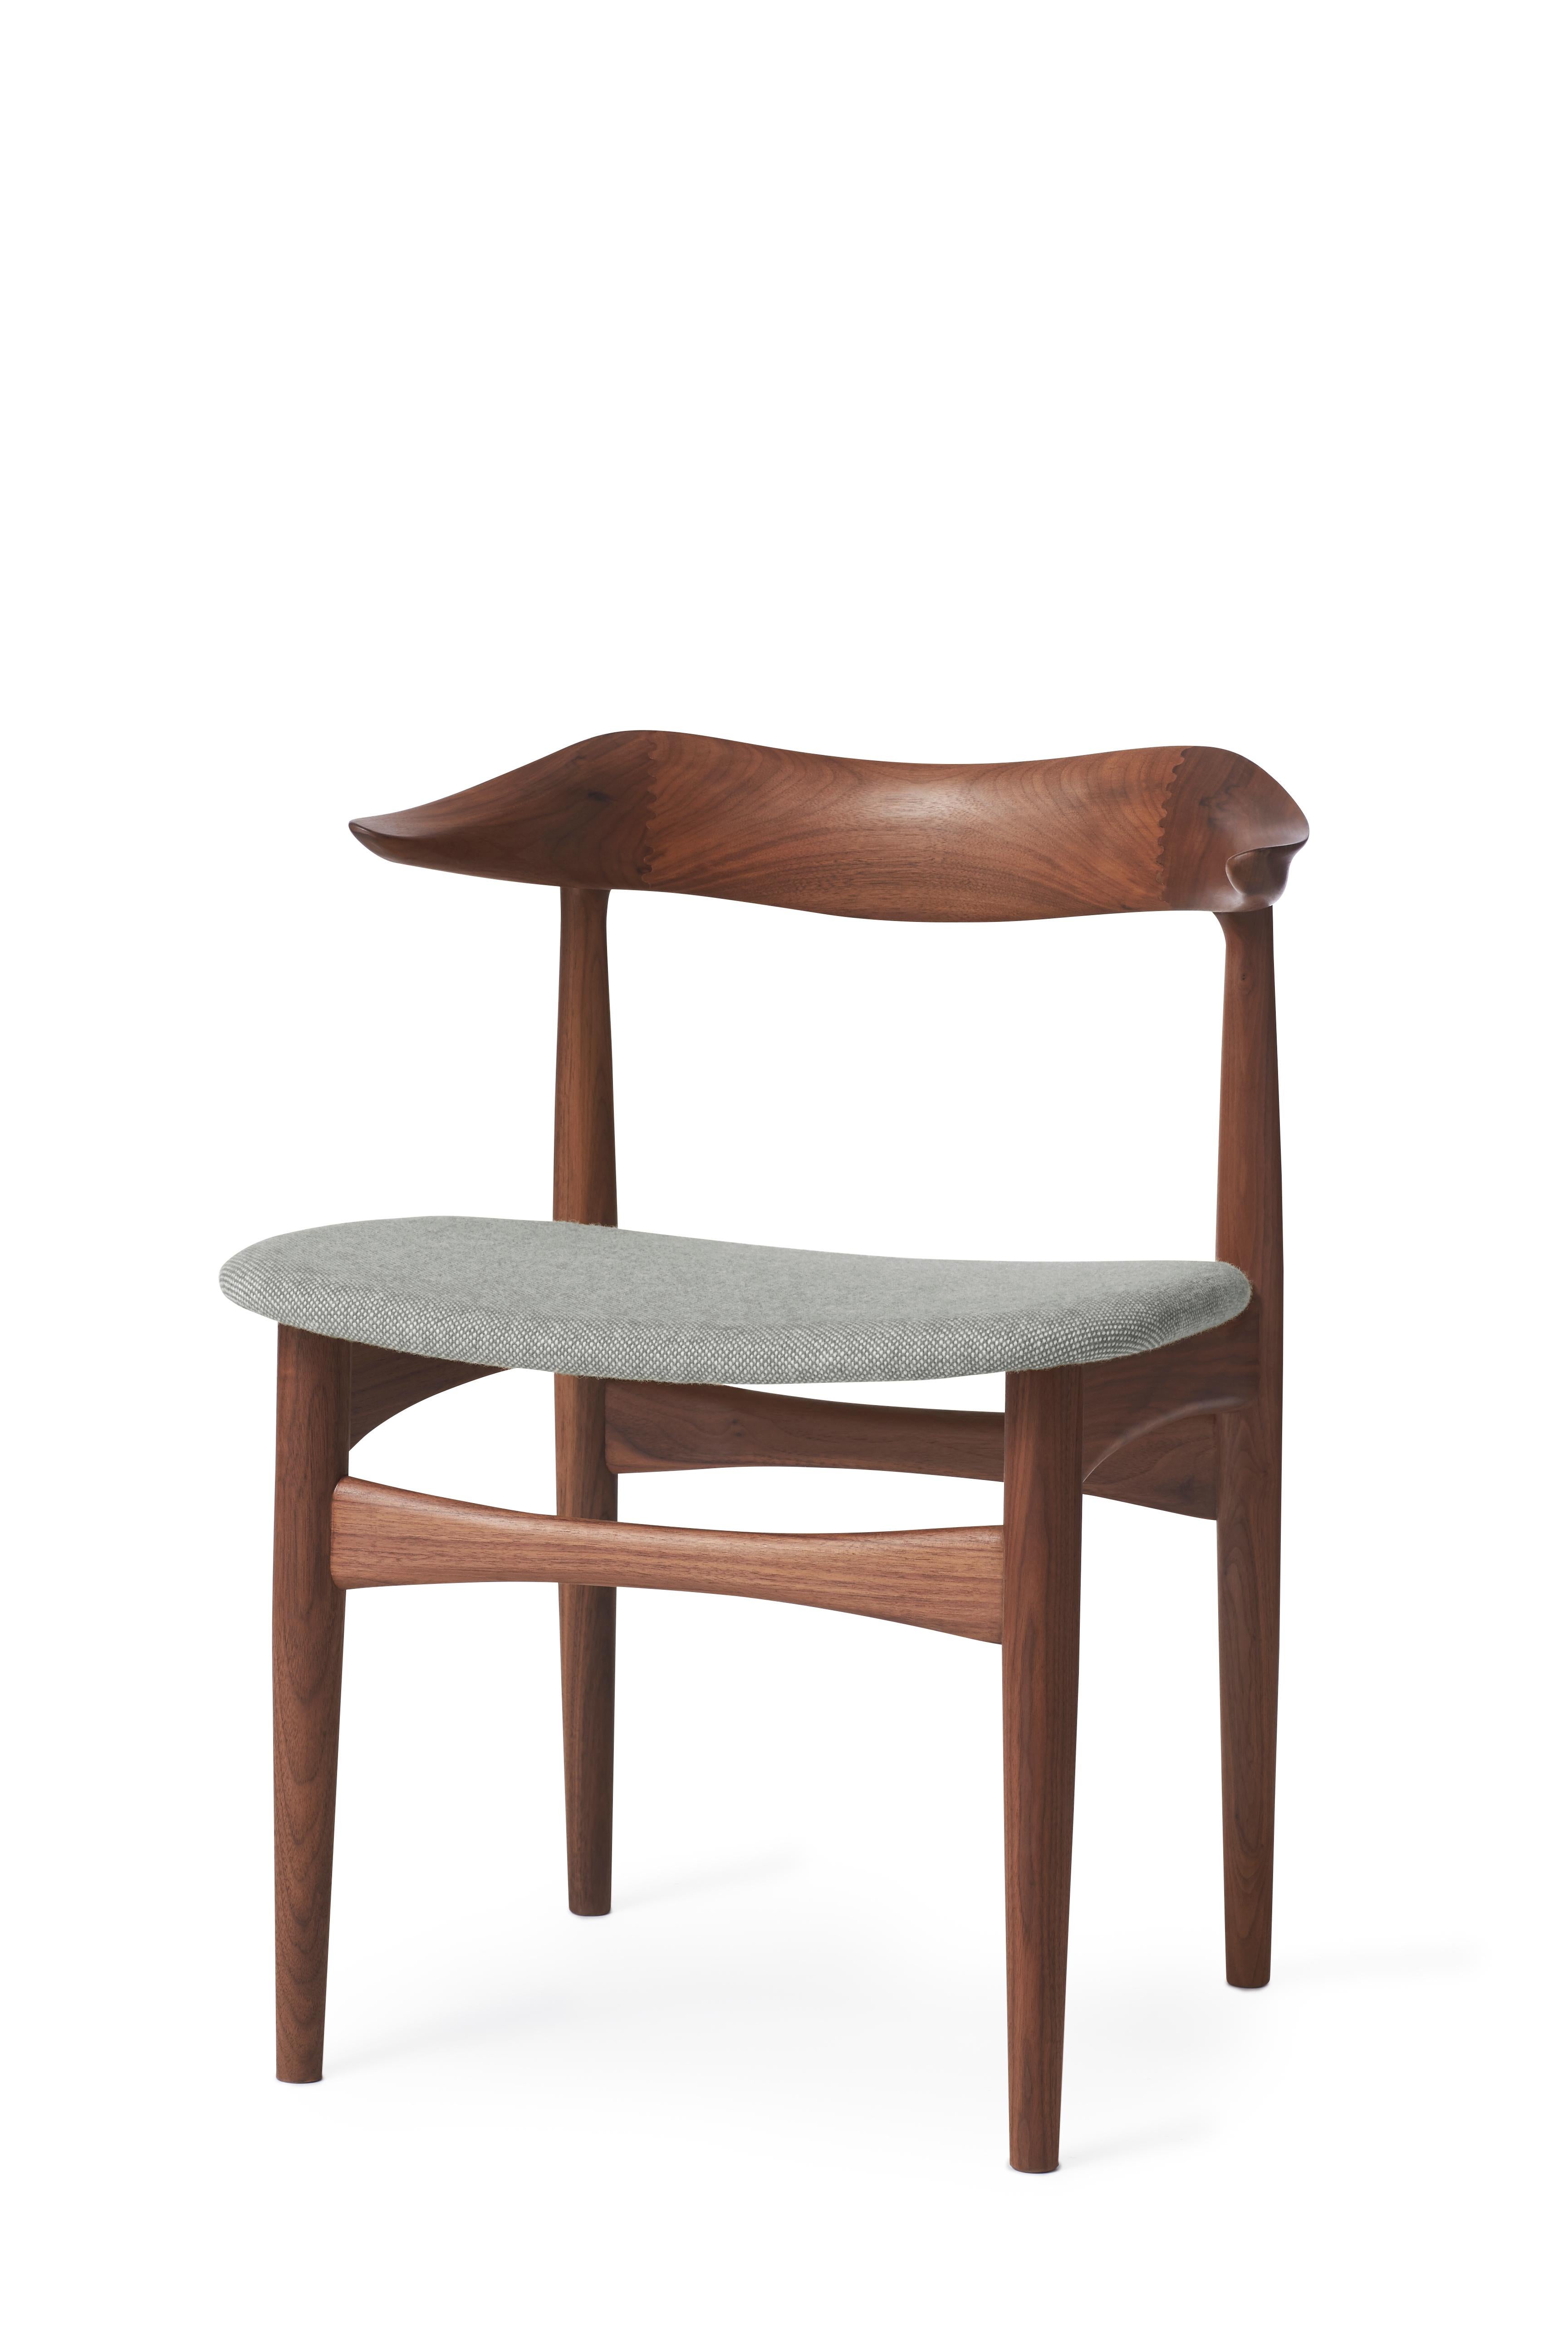 For Sale: Gray (Hallingdal 116) Cow Horn Walnut Chair, by Knud Færch from Warm Nordic 2